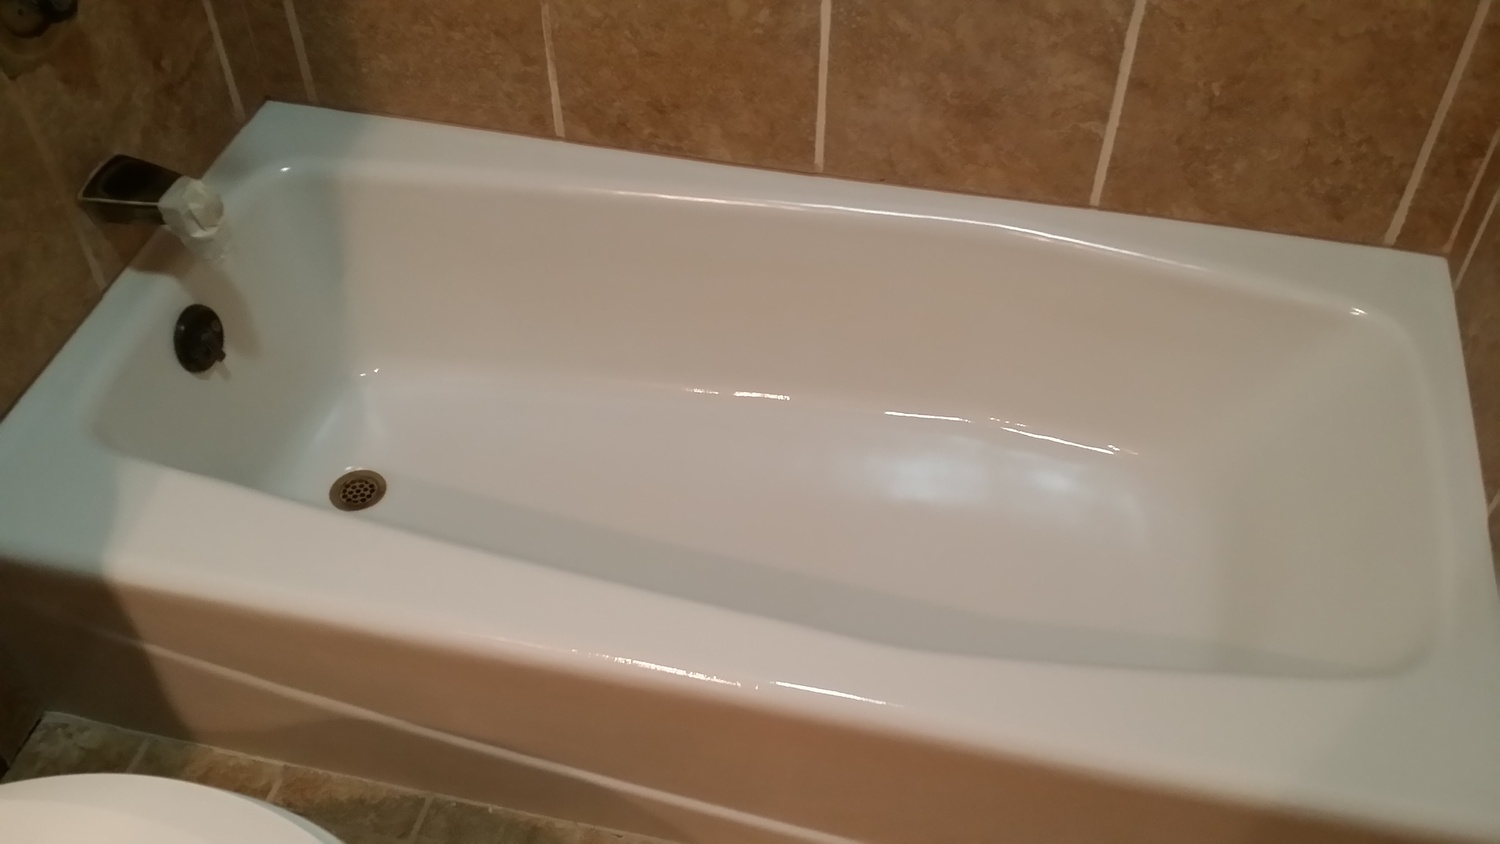 A Resurfaced or reglazed bathtub with a pure white finish. The tub is a baked porcelain over cast iron. Oil rubbed bronze finished drain and overflow